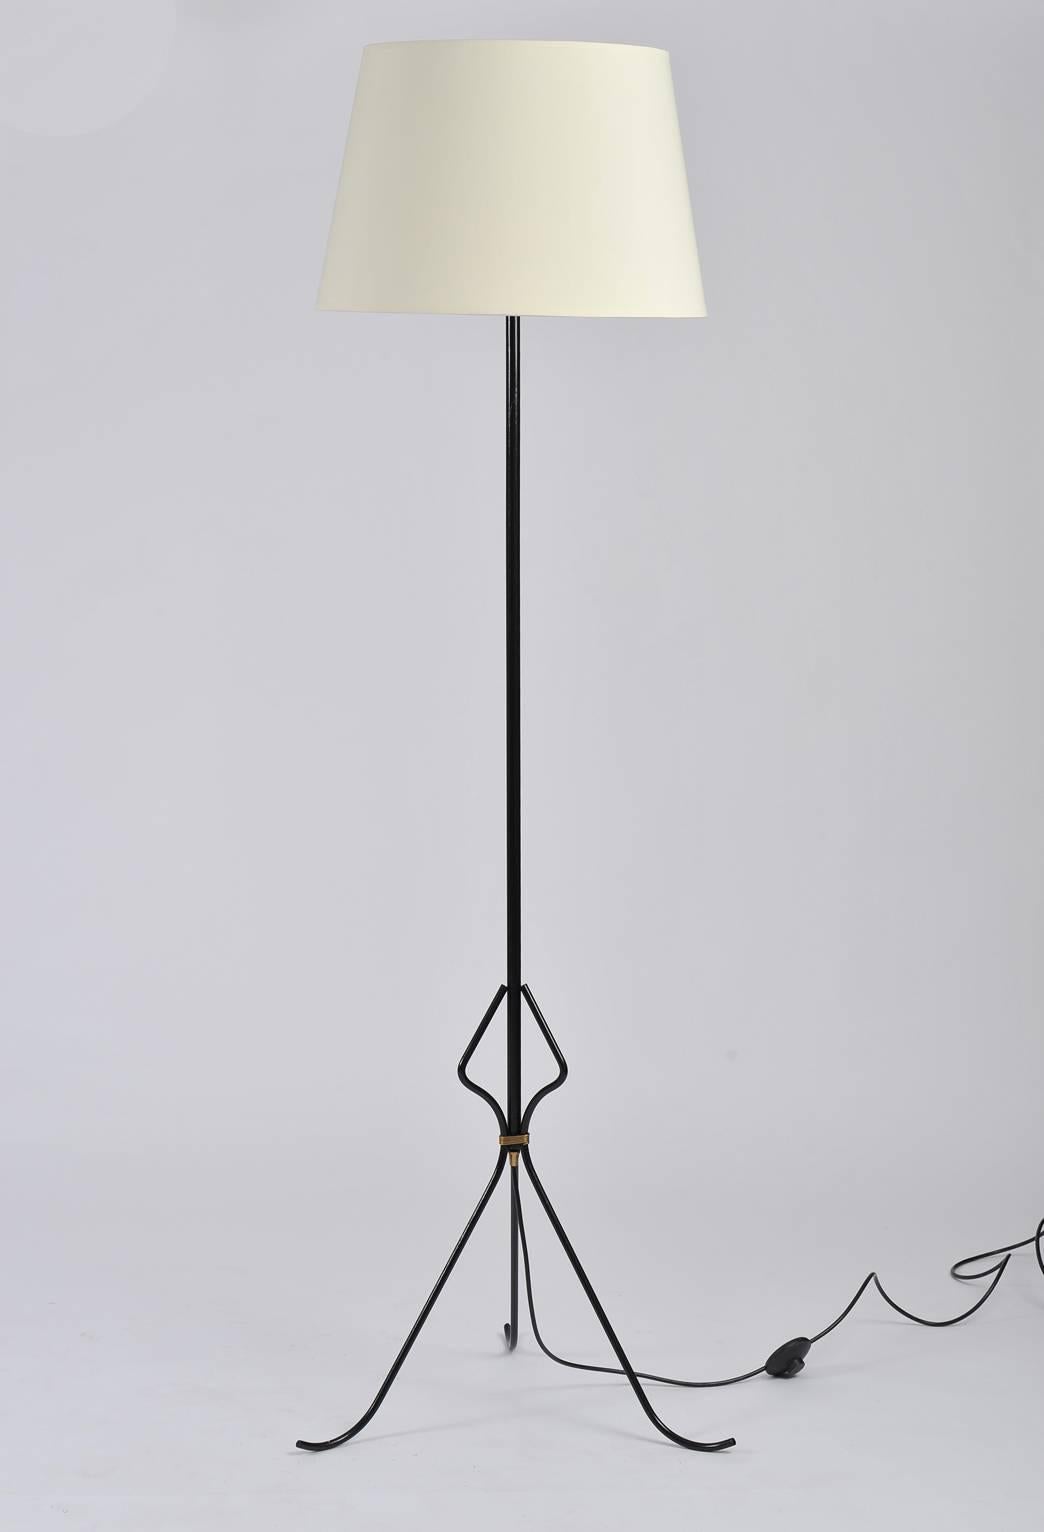 A black enameled iron floor lamp the tripod bass with a brass band detail
with a bespoke ivory fabric tapered shade
France, circa 1950

Dimensions are inclusive of the shade.